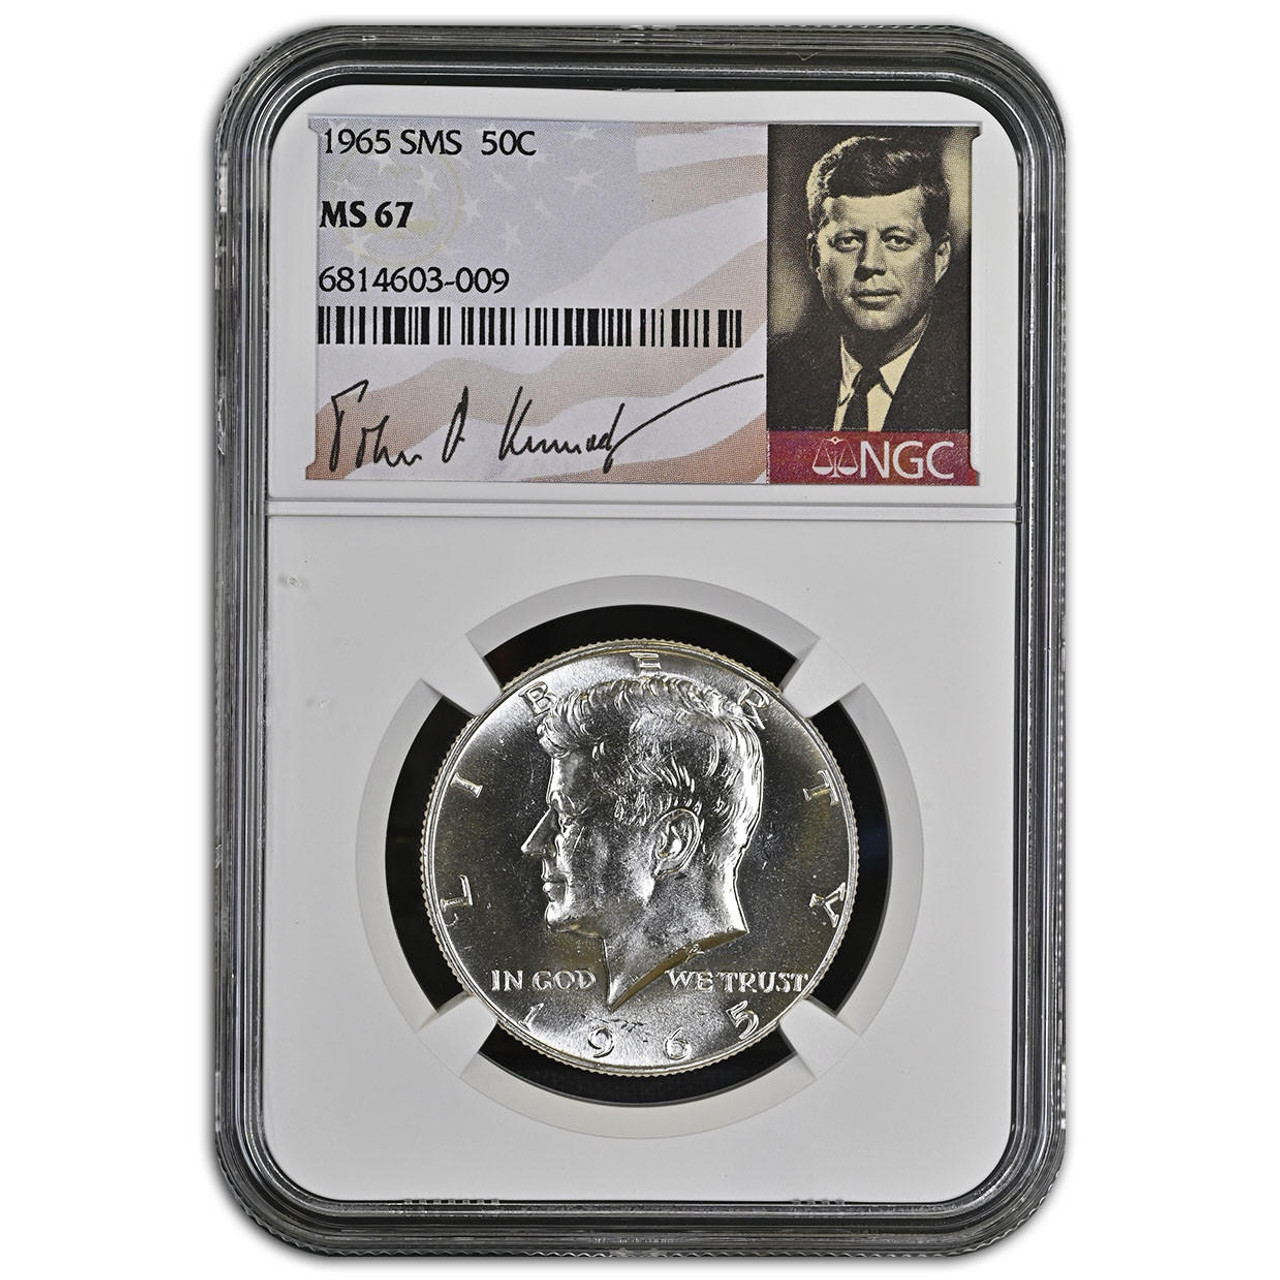 1965 SMS Kennedy Half Dollar NGC MS67 - First Year of Issue